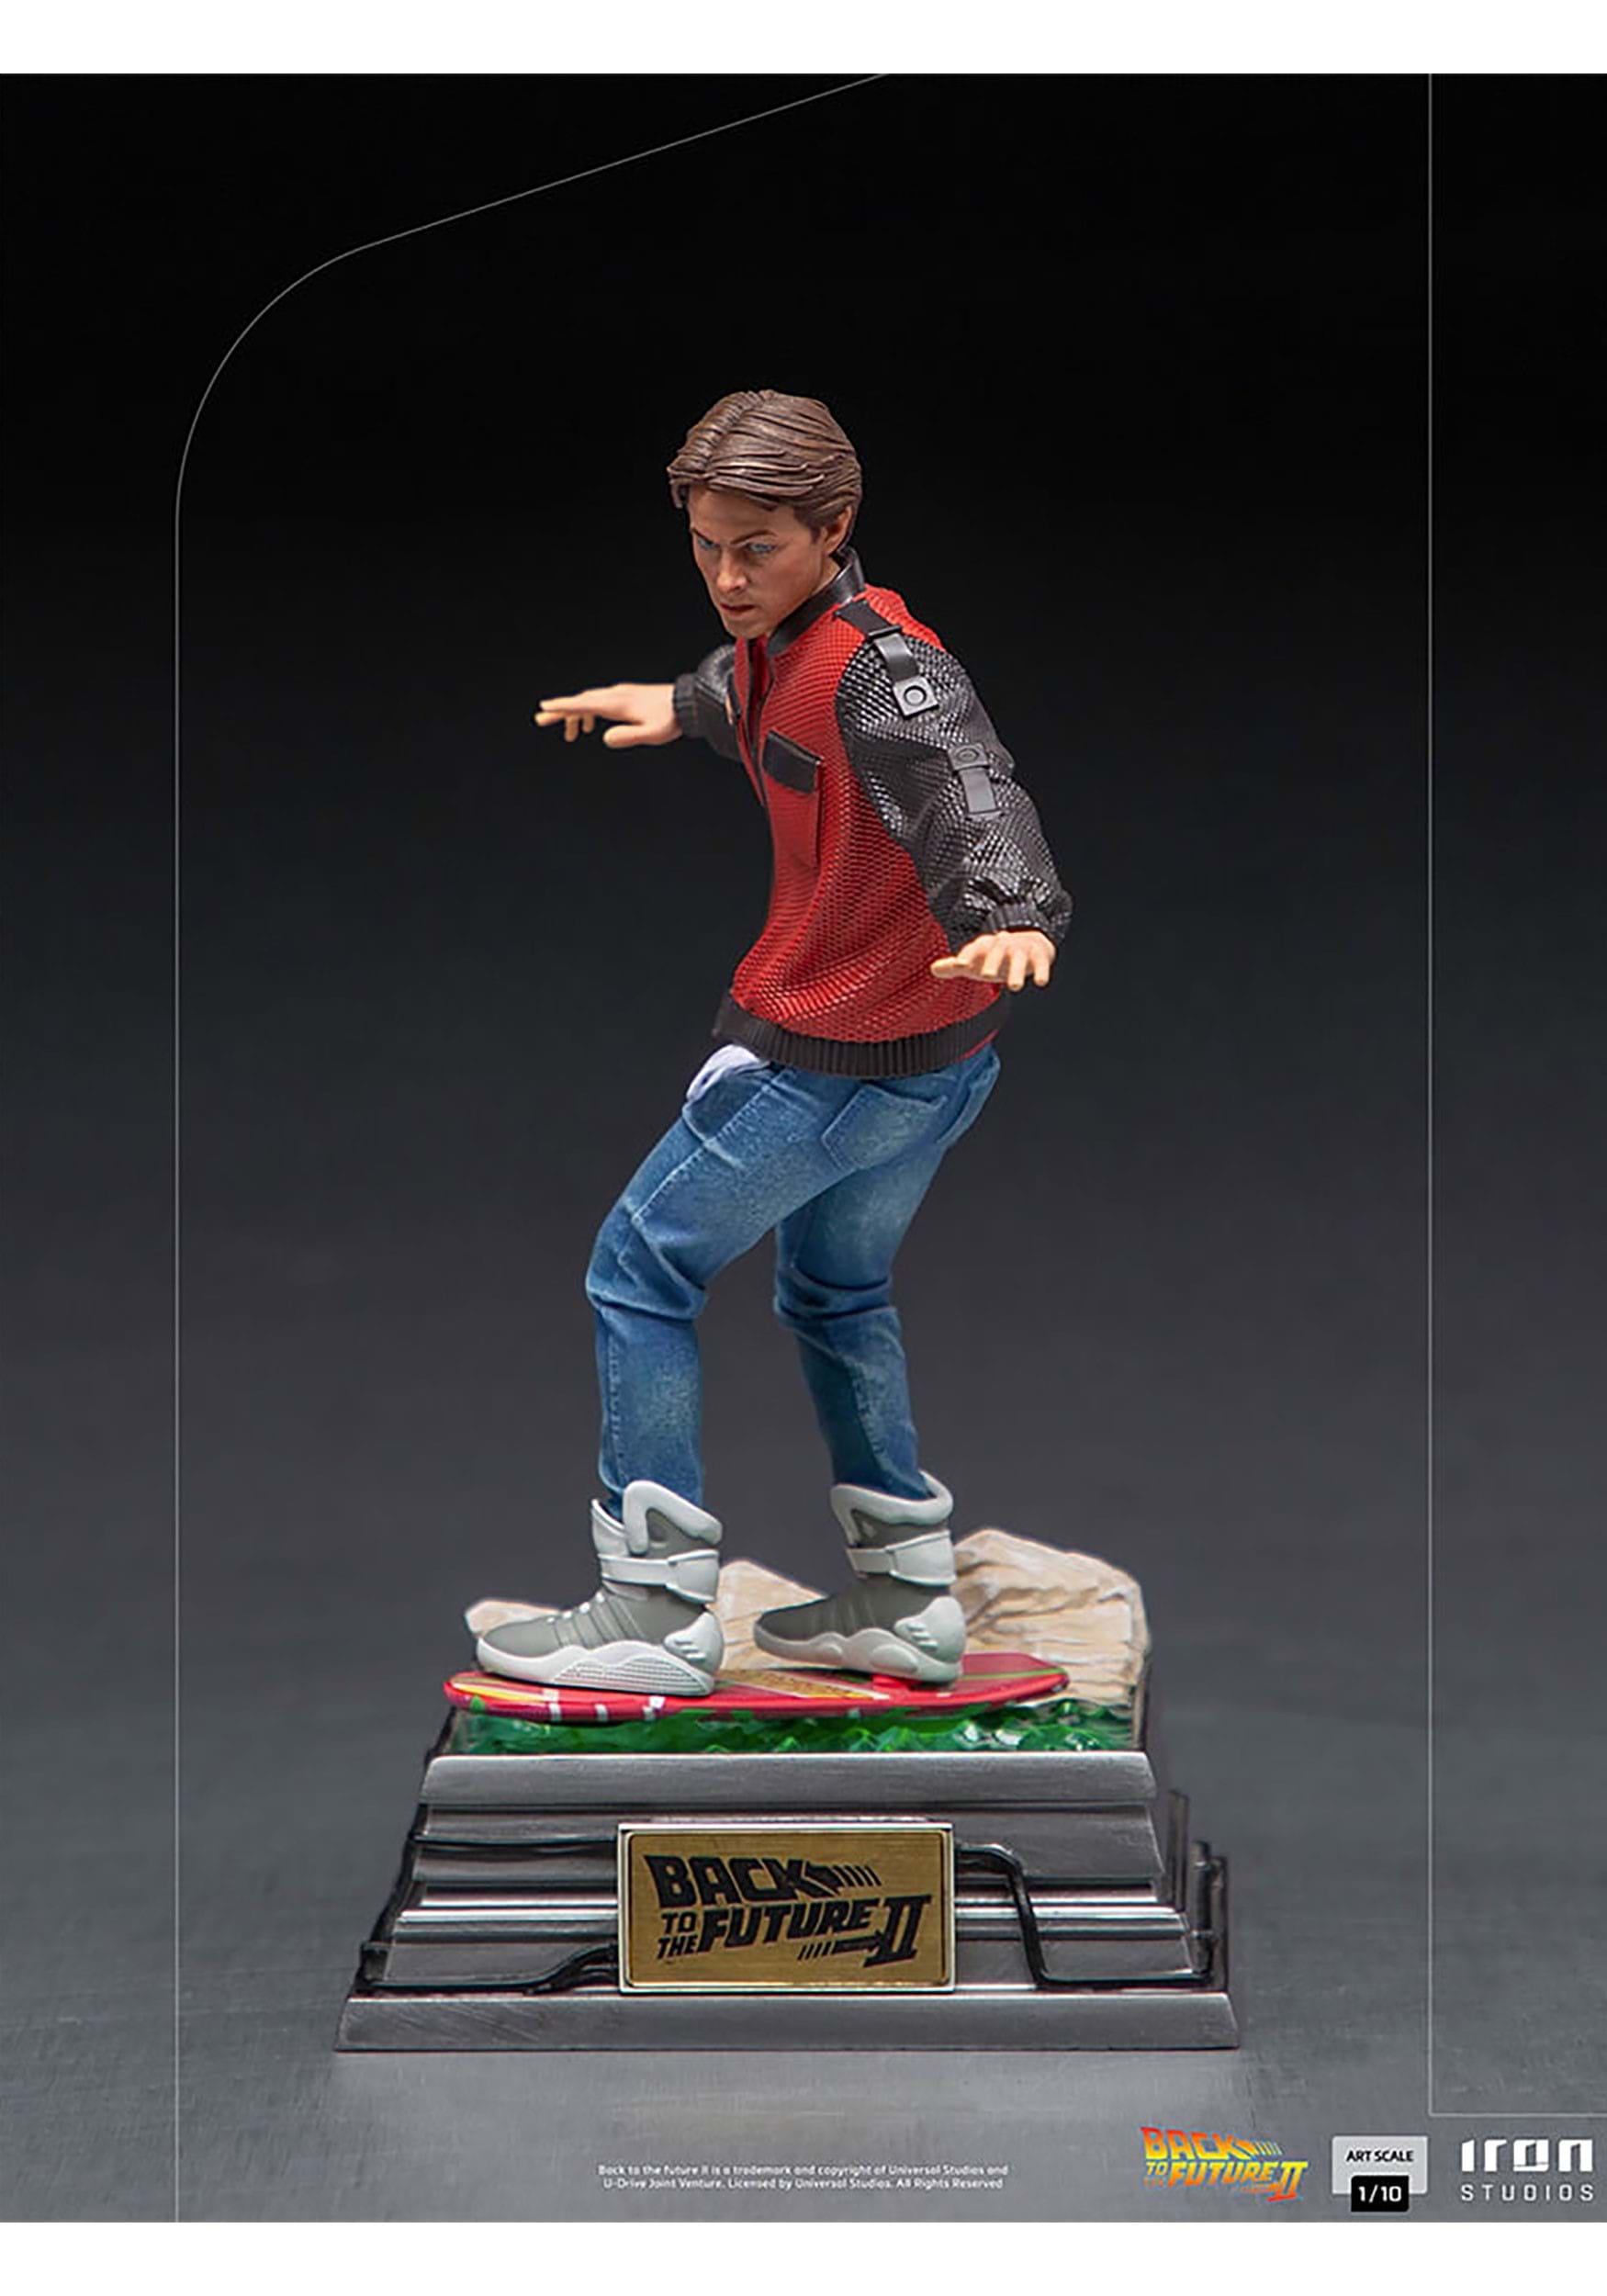 marty mcfly hoverboard year